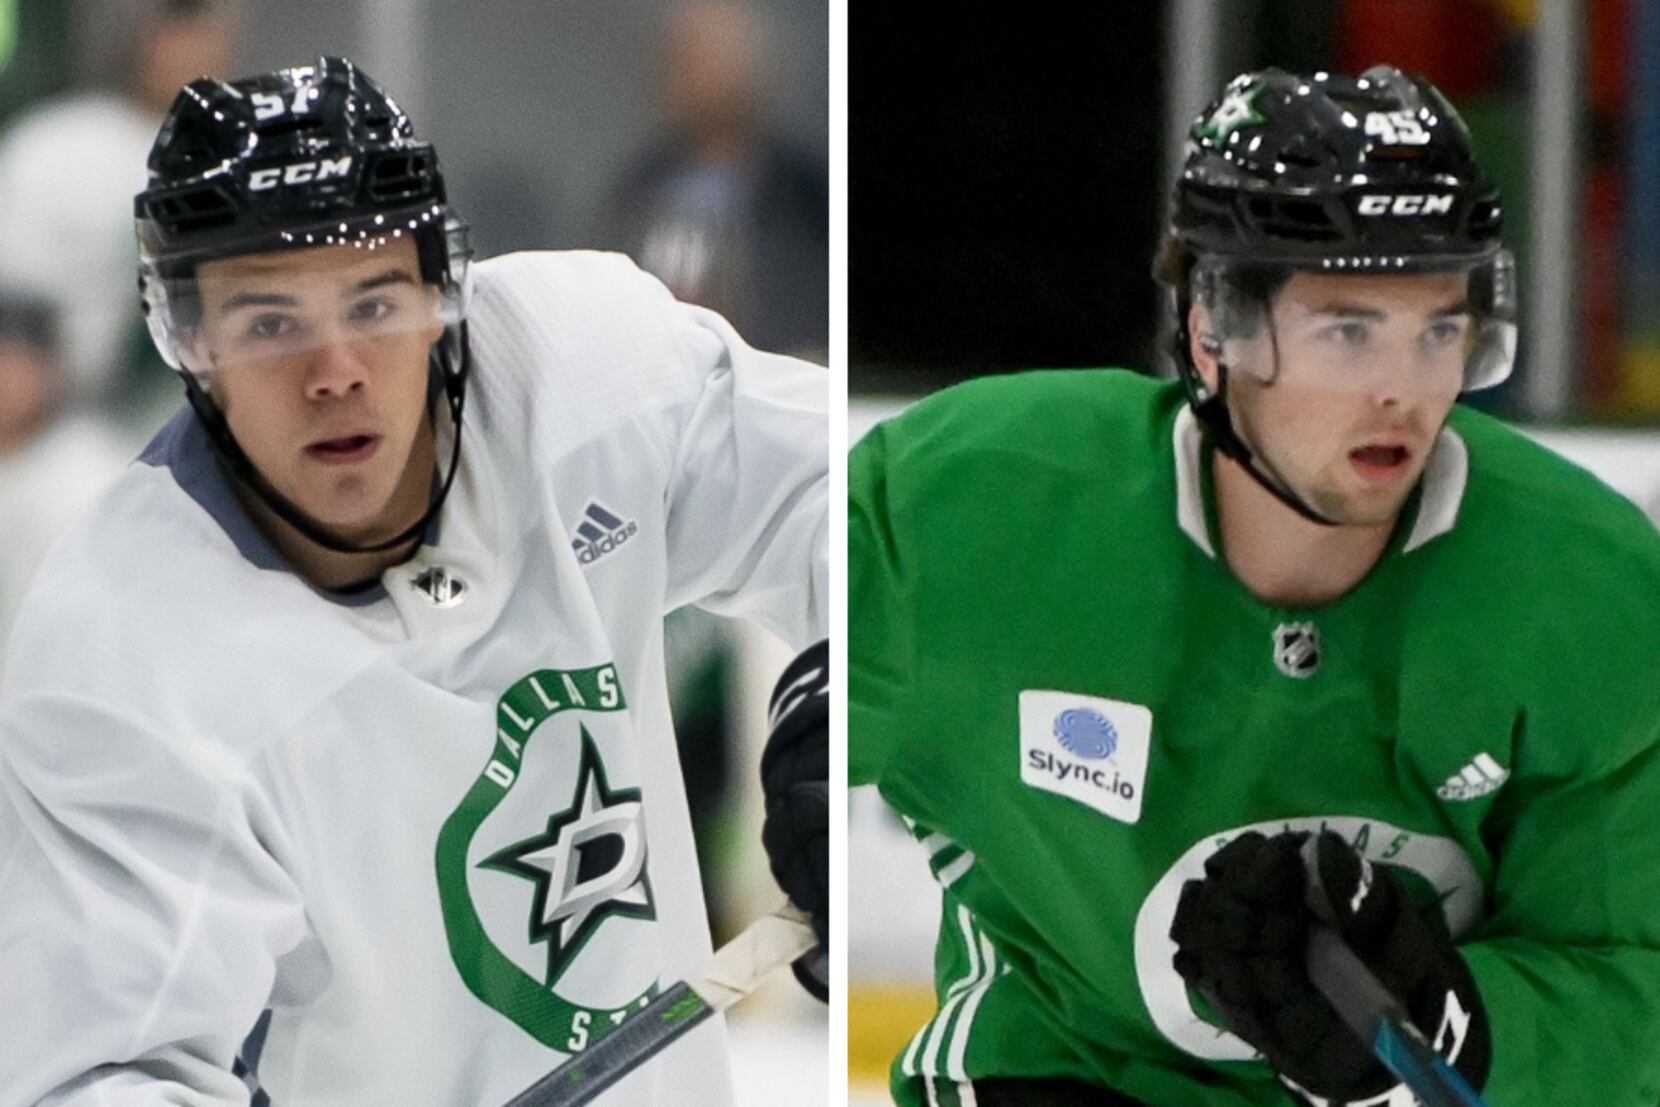 The future is now: The stars of the 2020 NHL All-Star Game